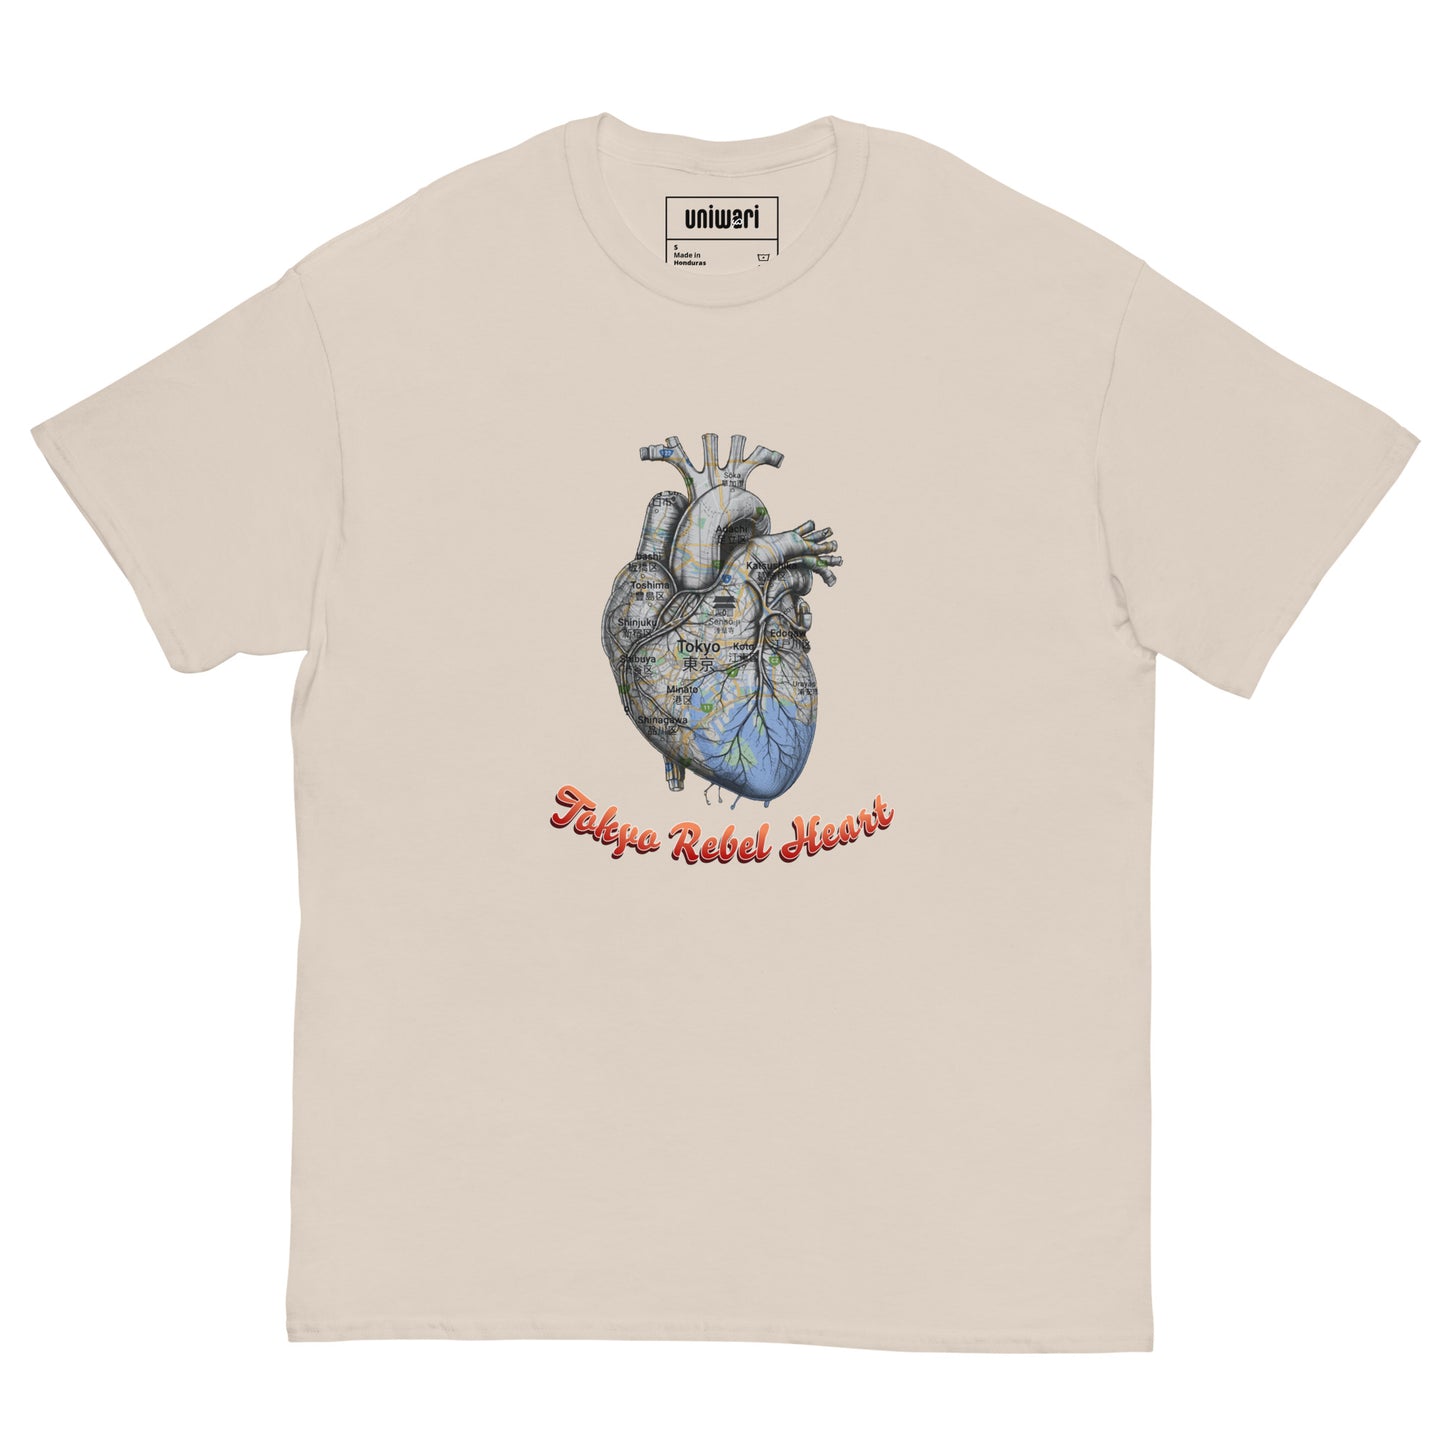 Beige High Quality Tee - Front Design with a Heart Shaped Map of Tokyo and a Phrase "Tokyo Rebel Heart" print